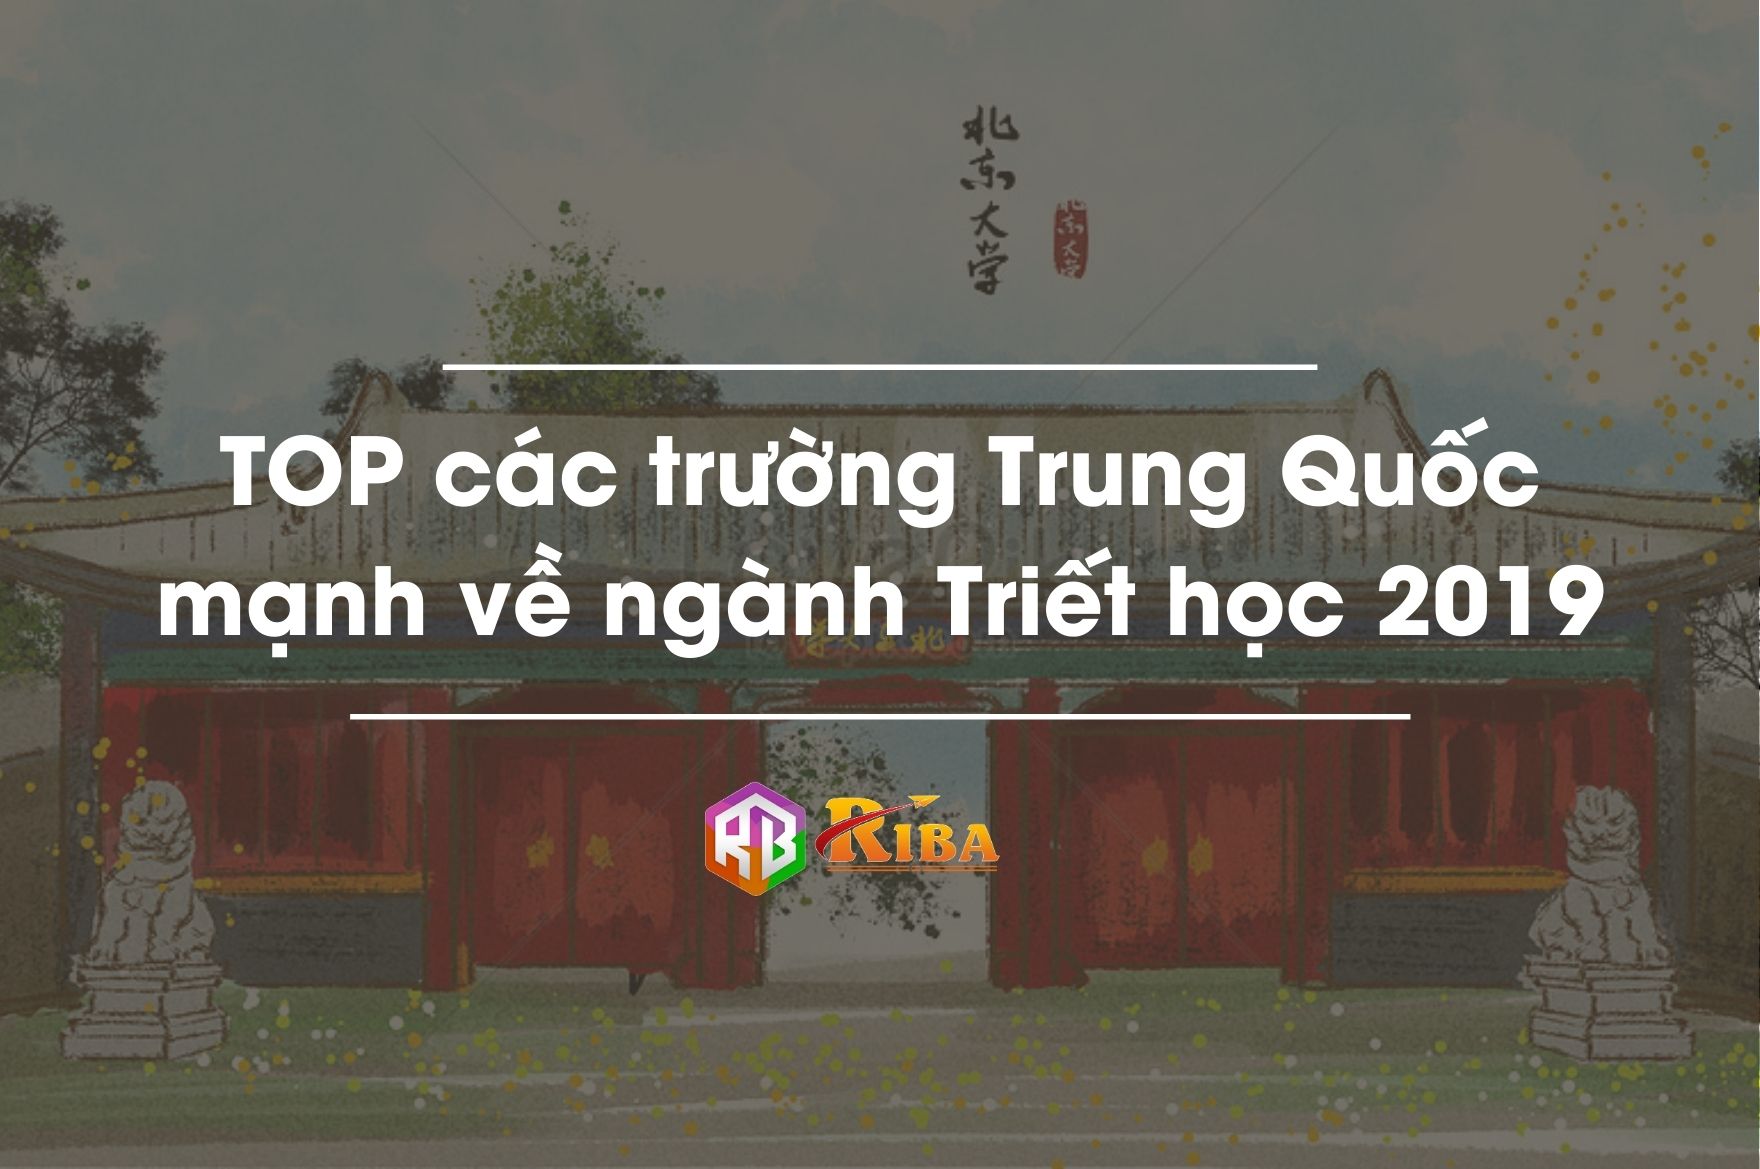 top-cac-truong-trung-quoc-manh-ve-nganh-triet-hoc-2019